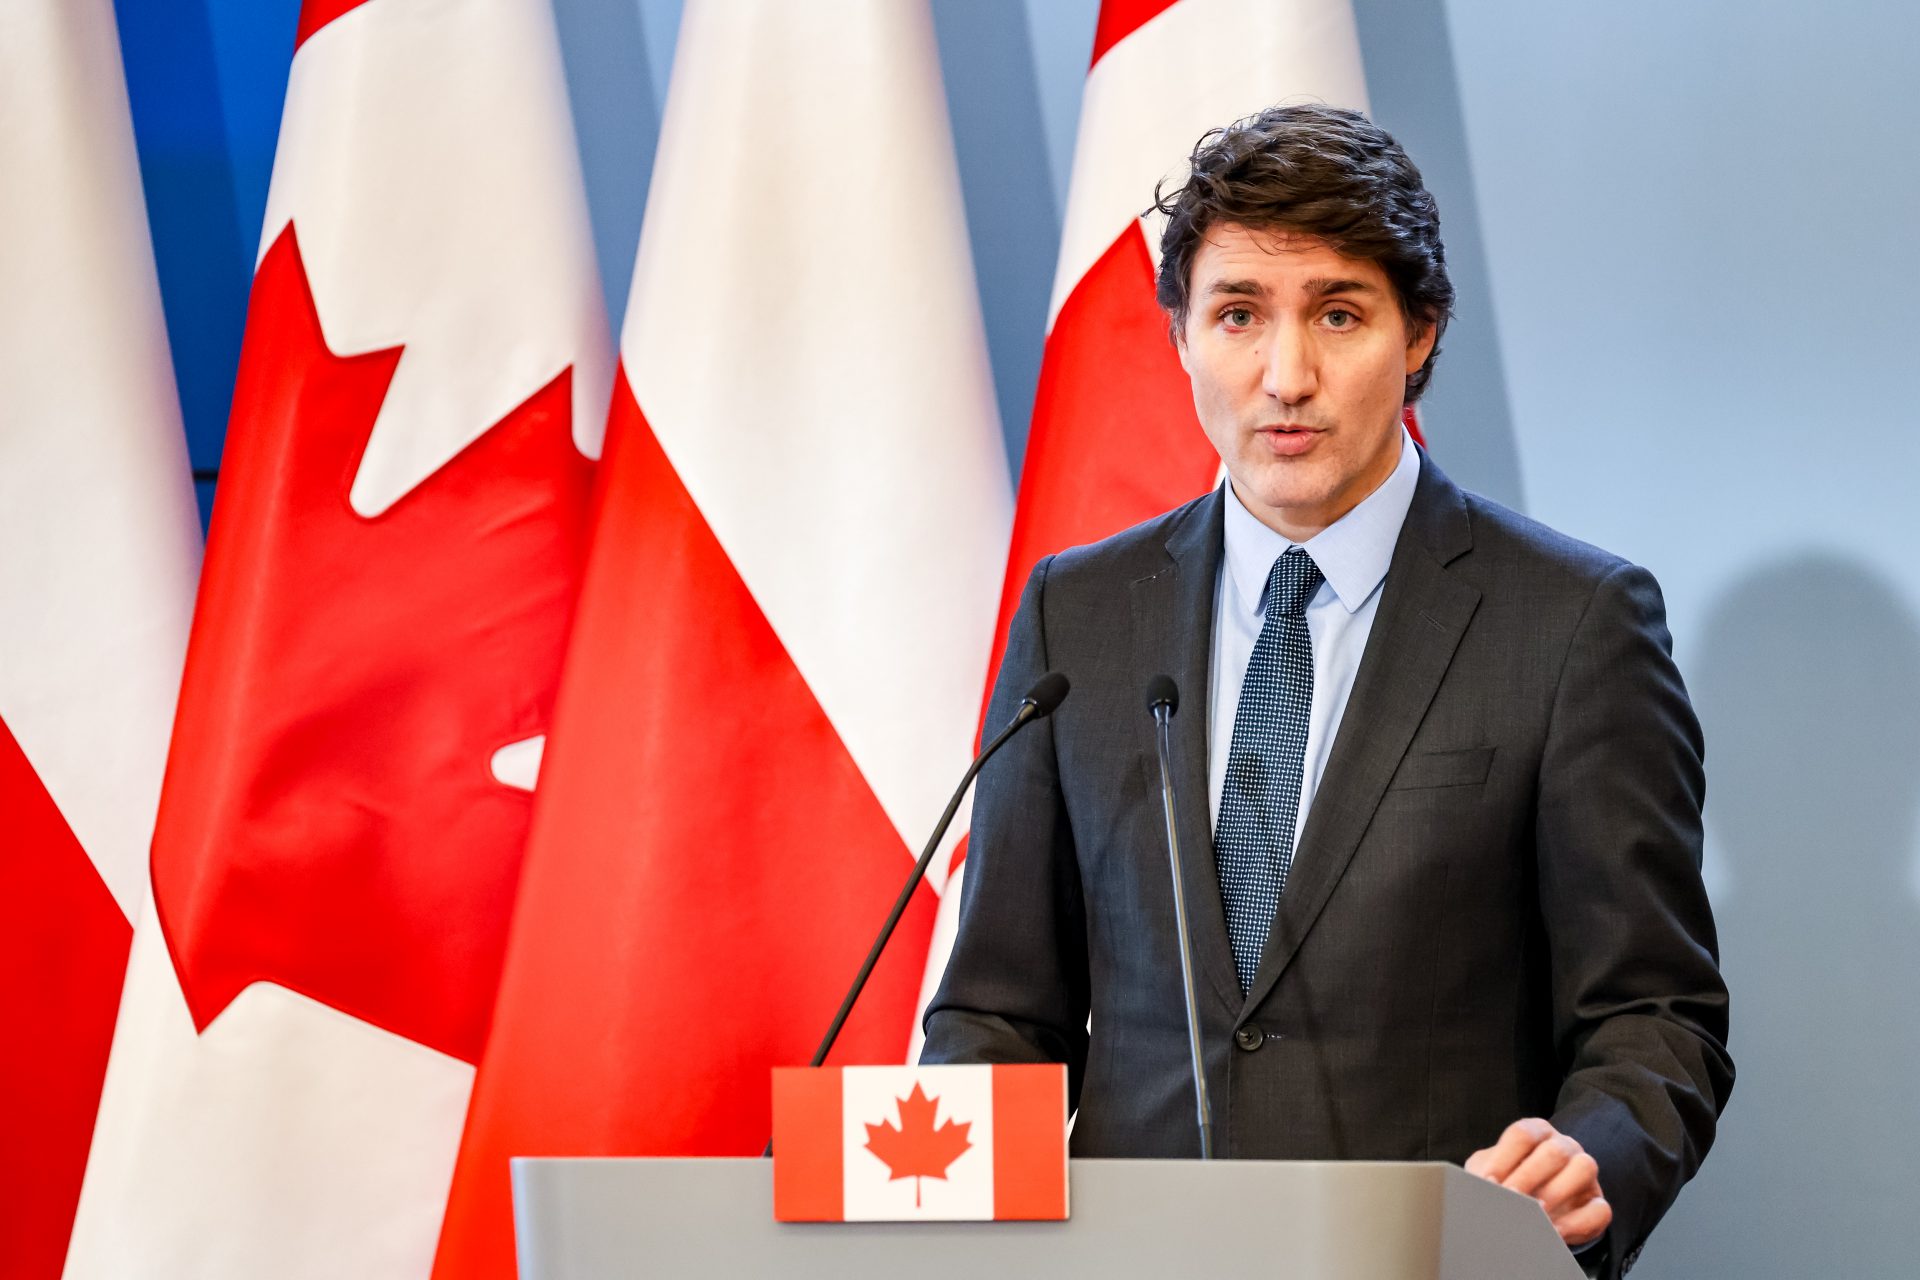 Should Trudeau stay or go? Canadians already weighed in before his recent historic loss